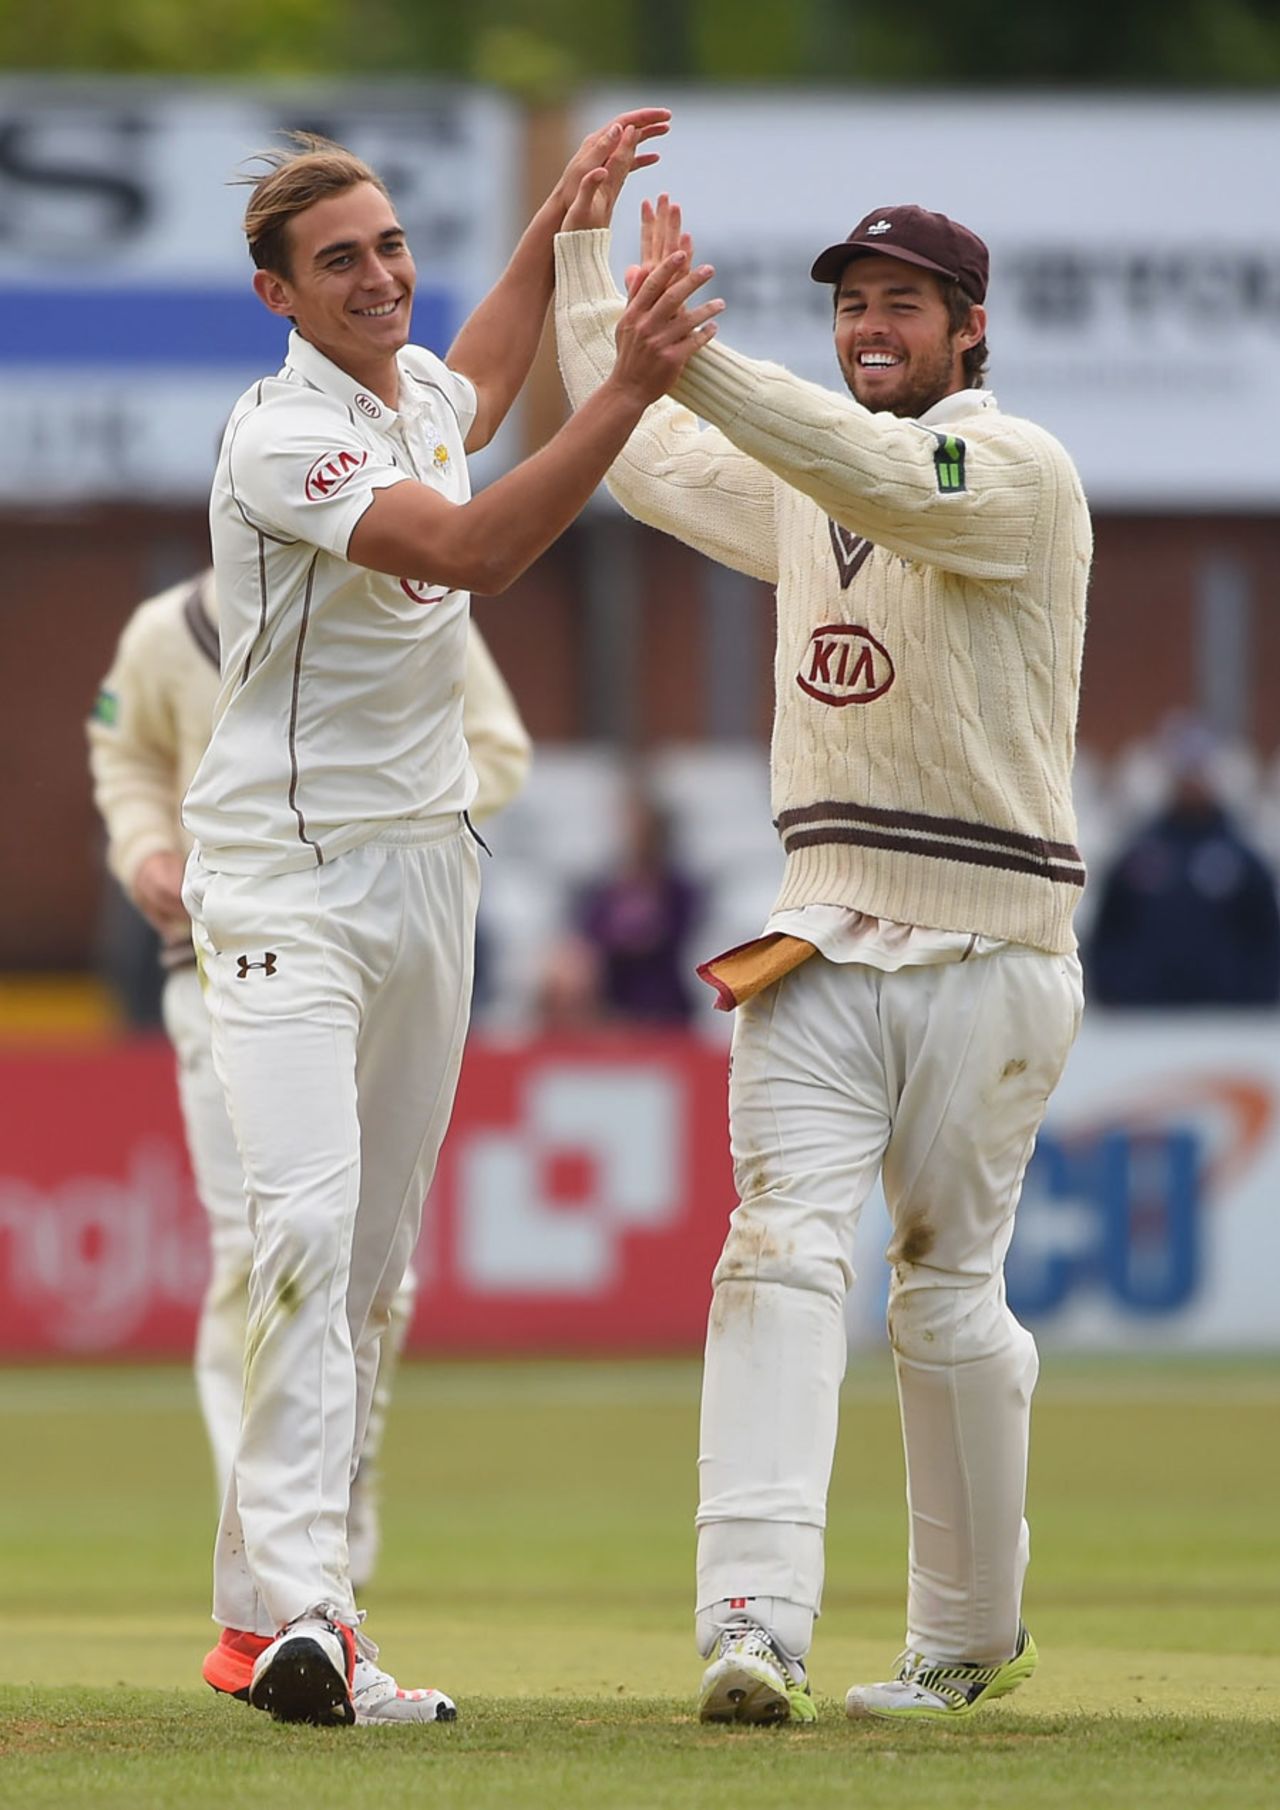 James Burke picked up 2 for 32, Derbyshire v Surrey, County Championship, Division Two, Derby, 2nd day, June 22, 2015